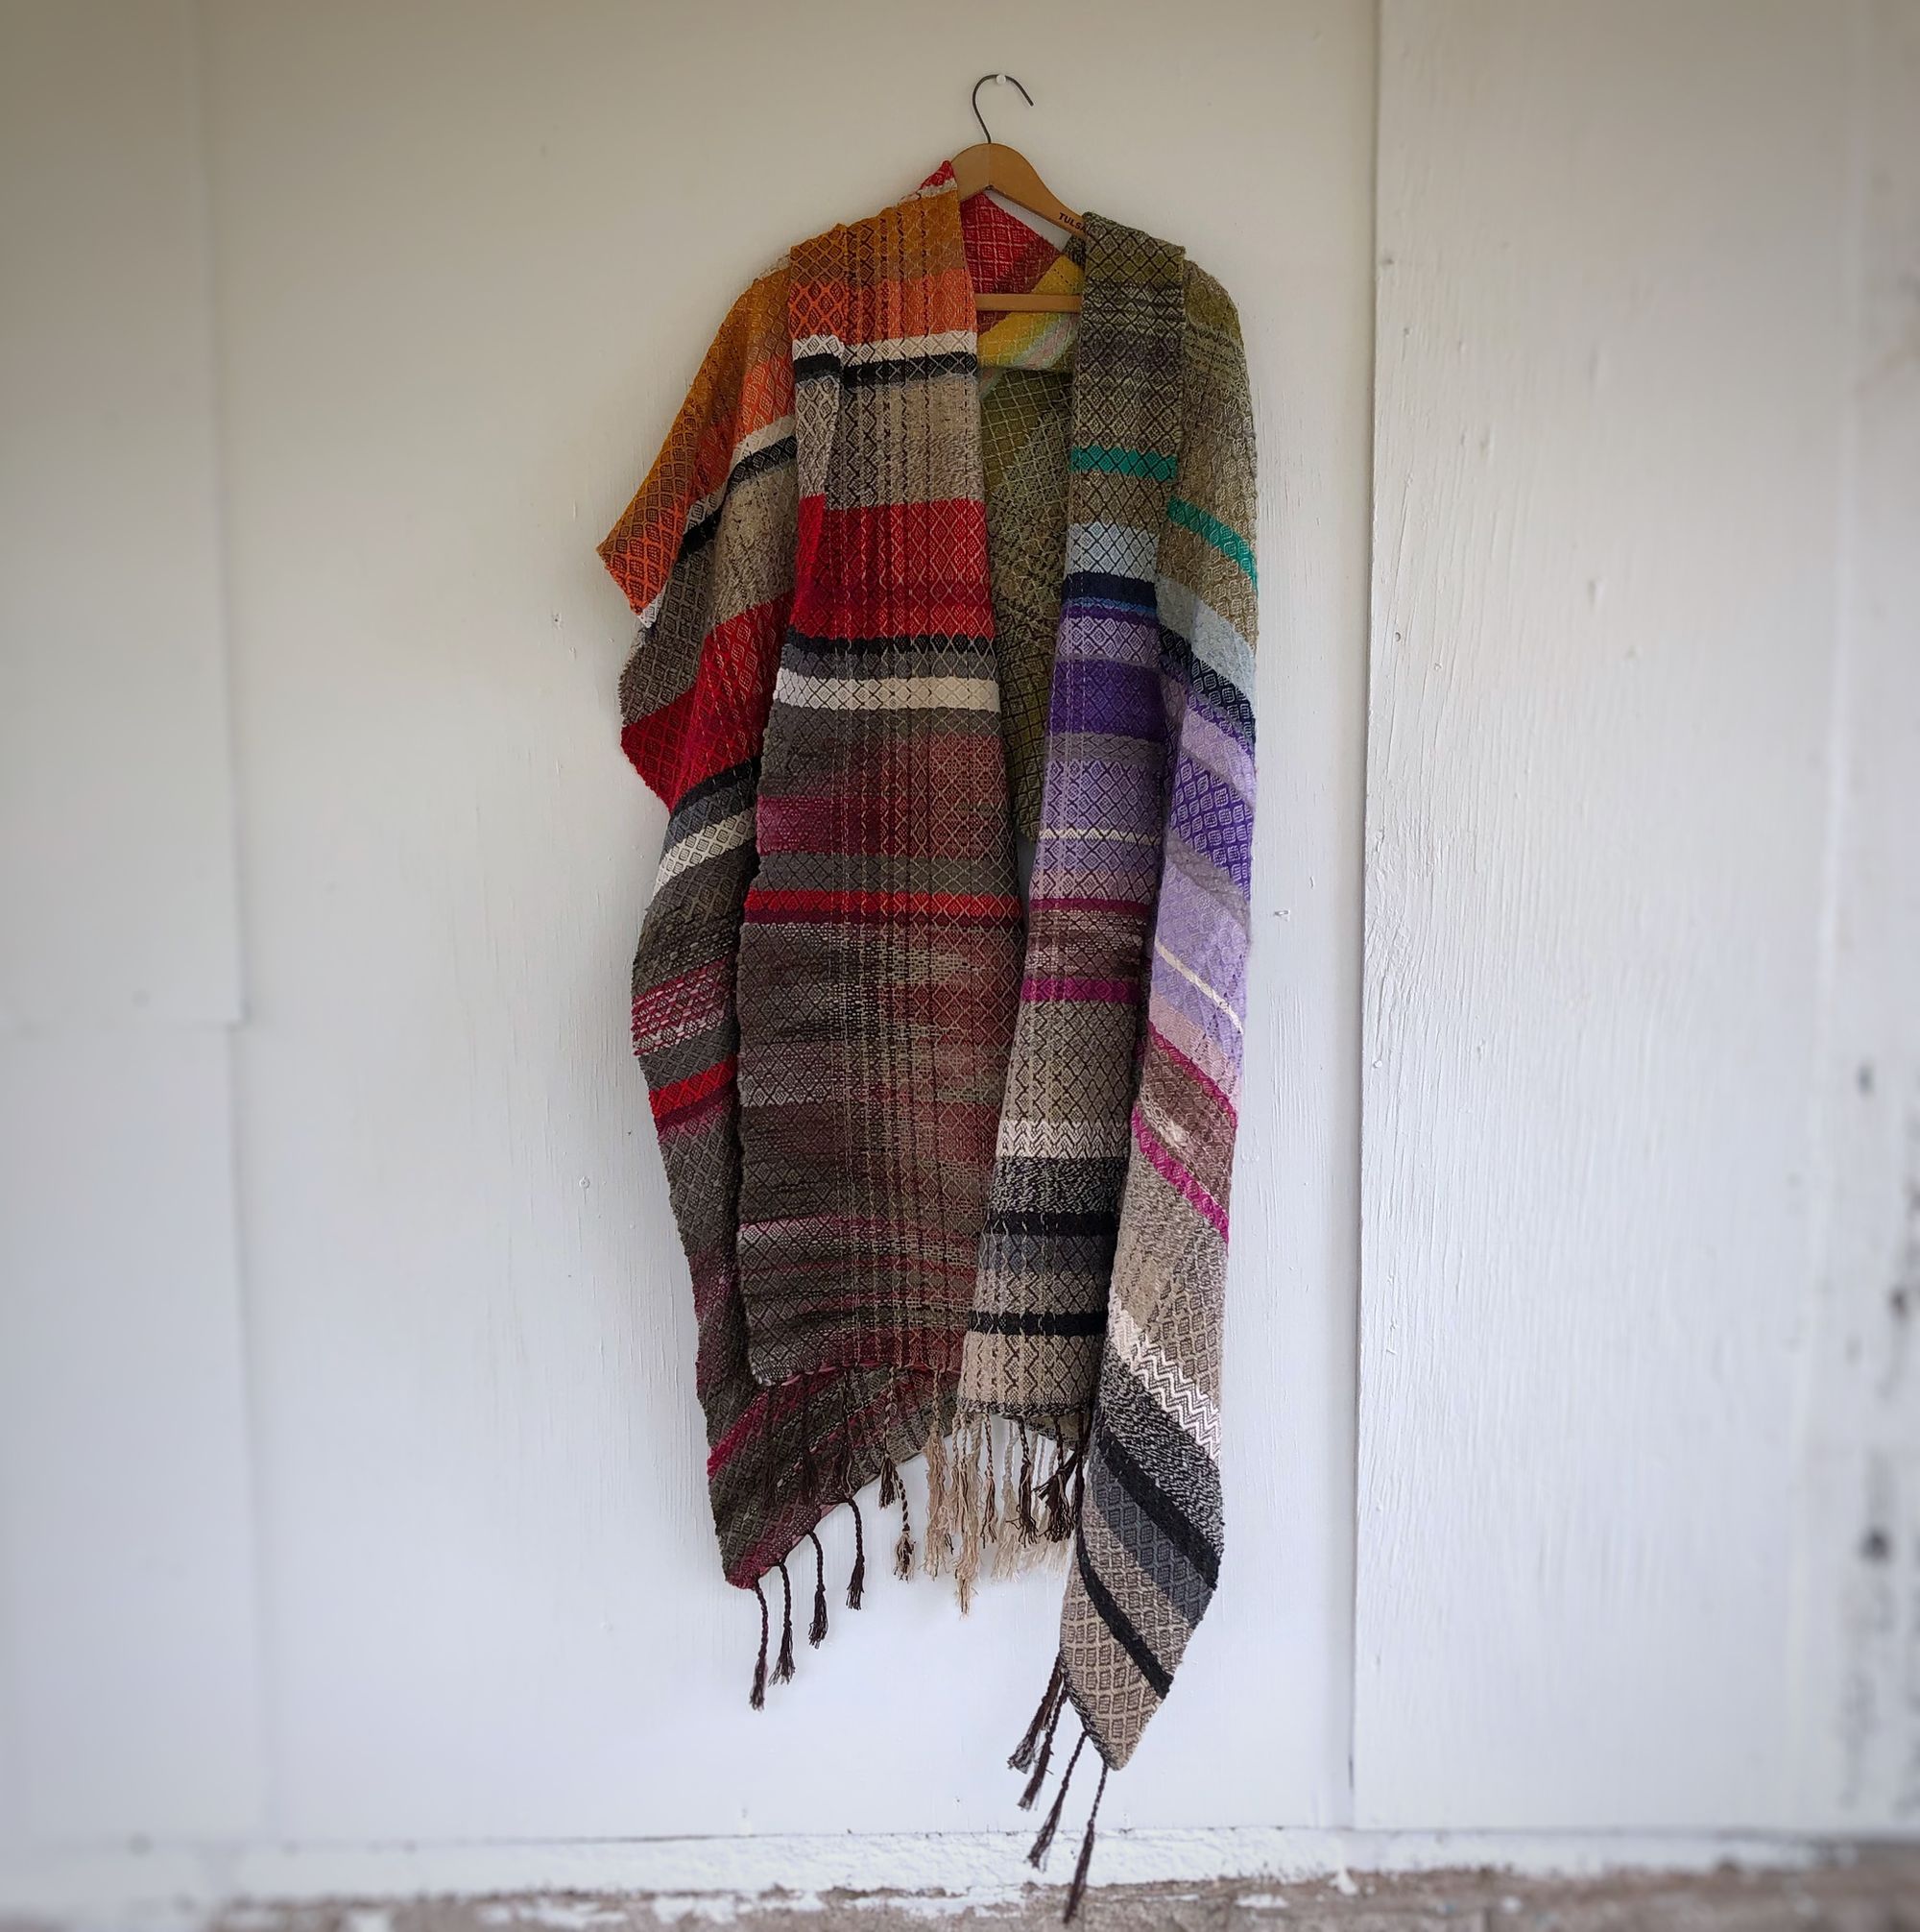 Handwoven red, white, orange, green, purple, brown and black shawl hanging on a hanger on a white wall